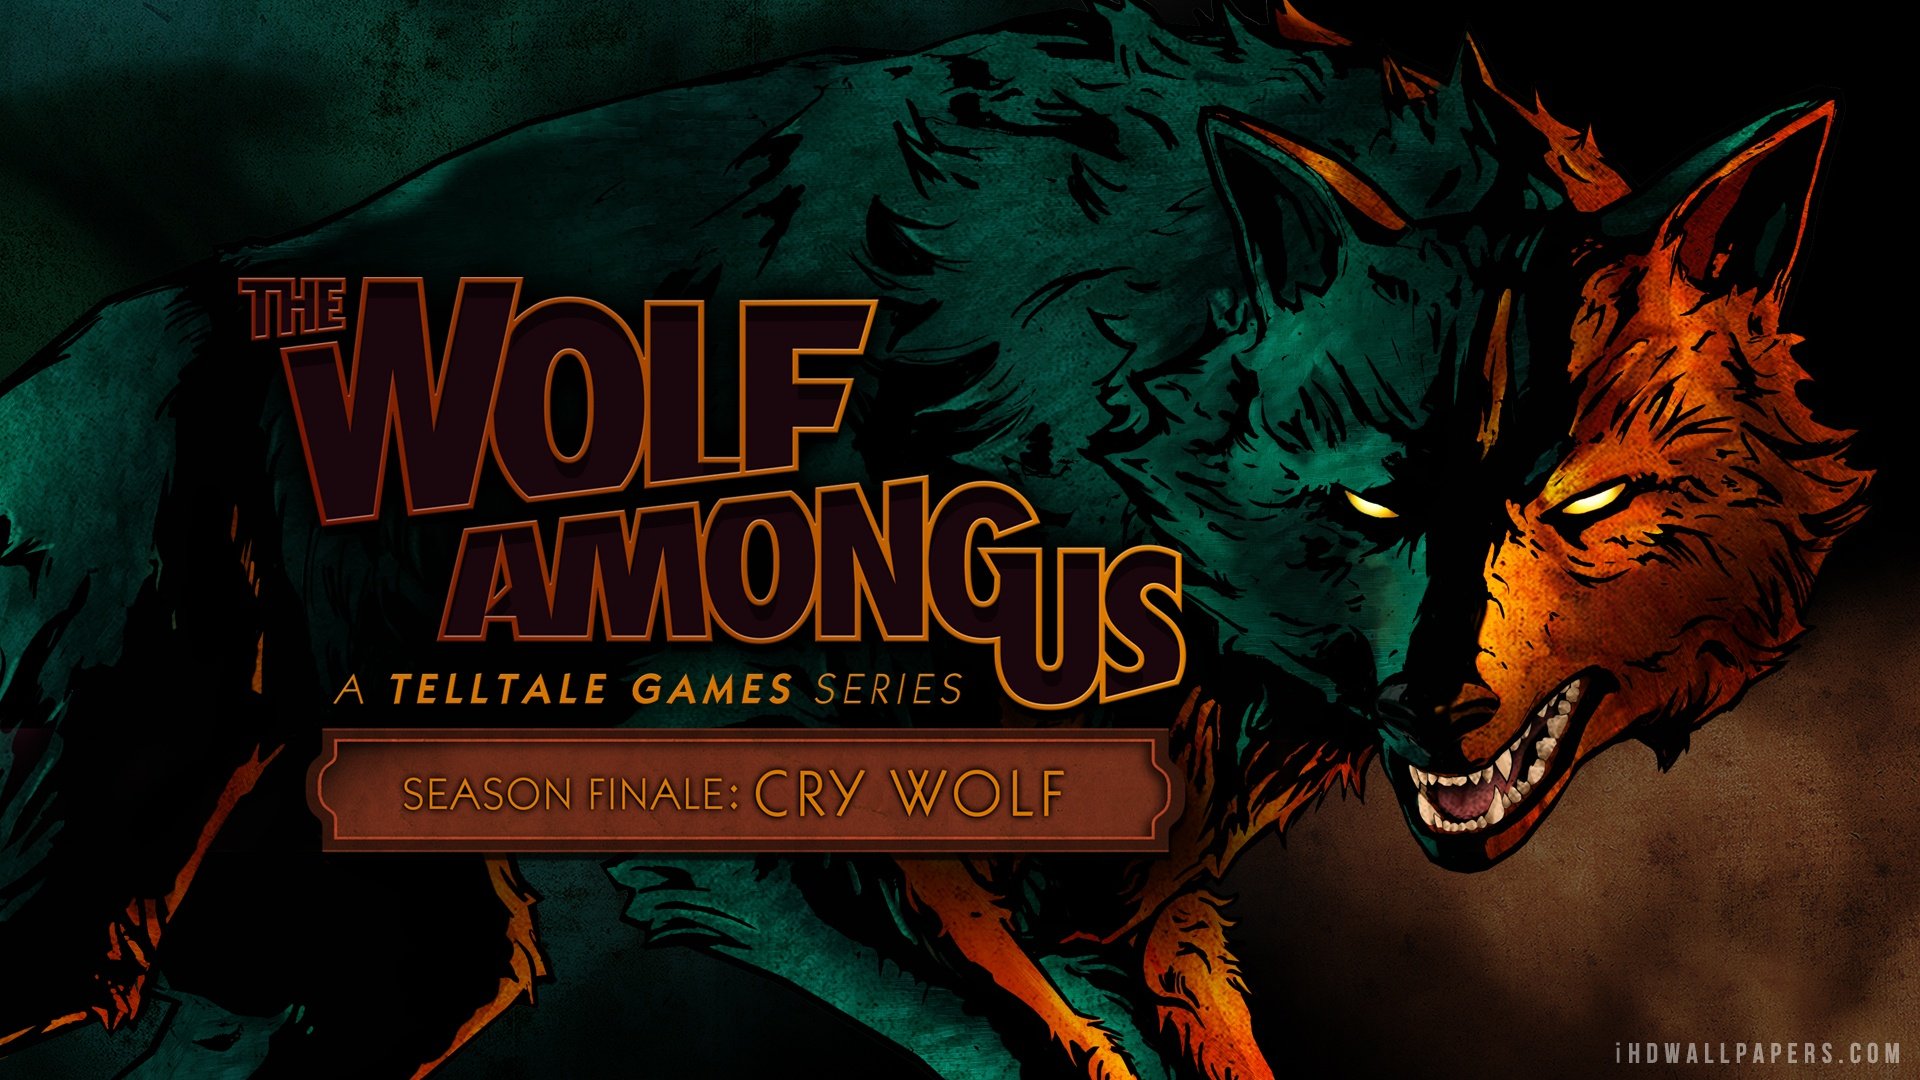 The Wolf Among Us Episode 5 Cry Wolf HD Wallpaper   iHD Wallpapers 1920x1080